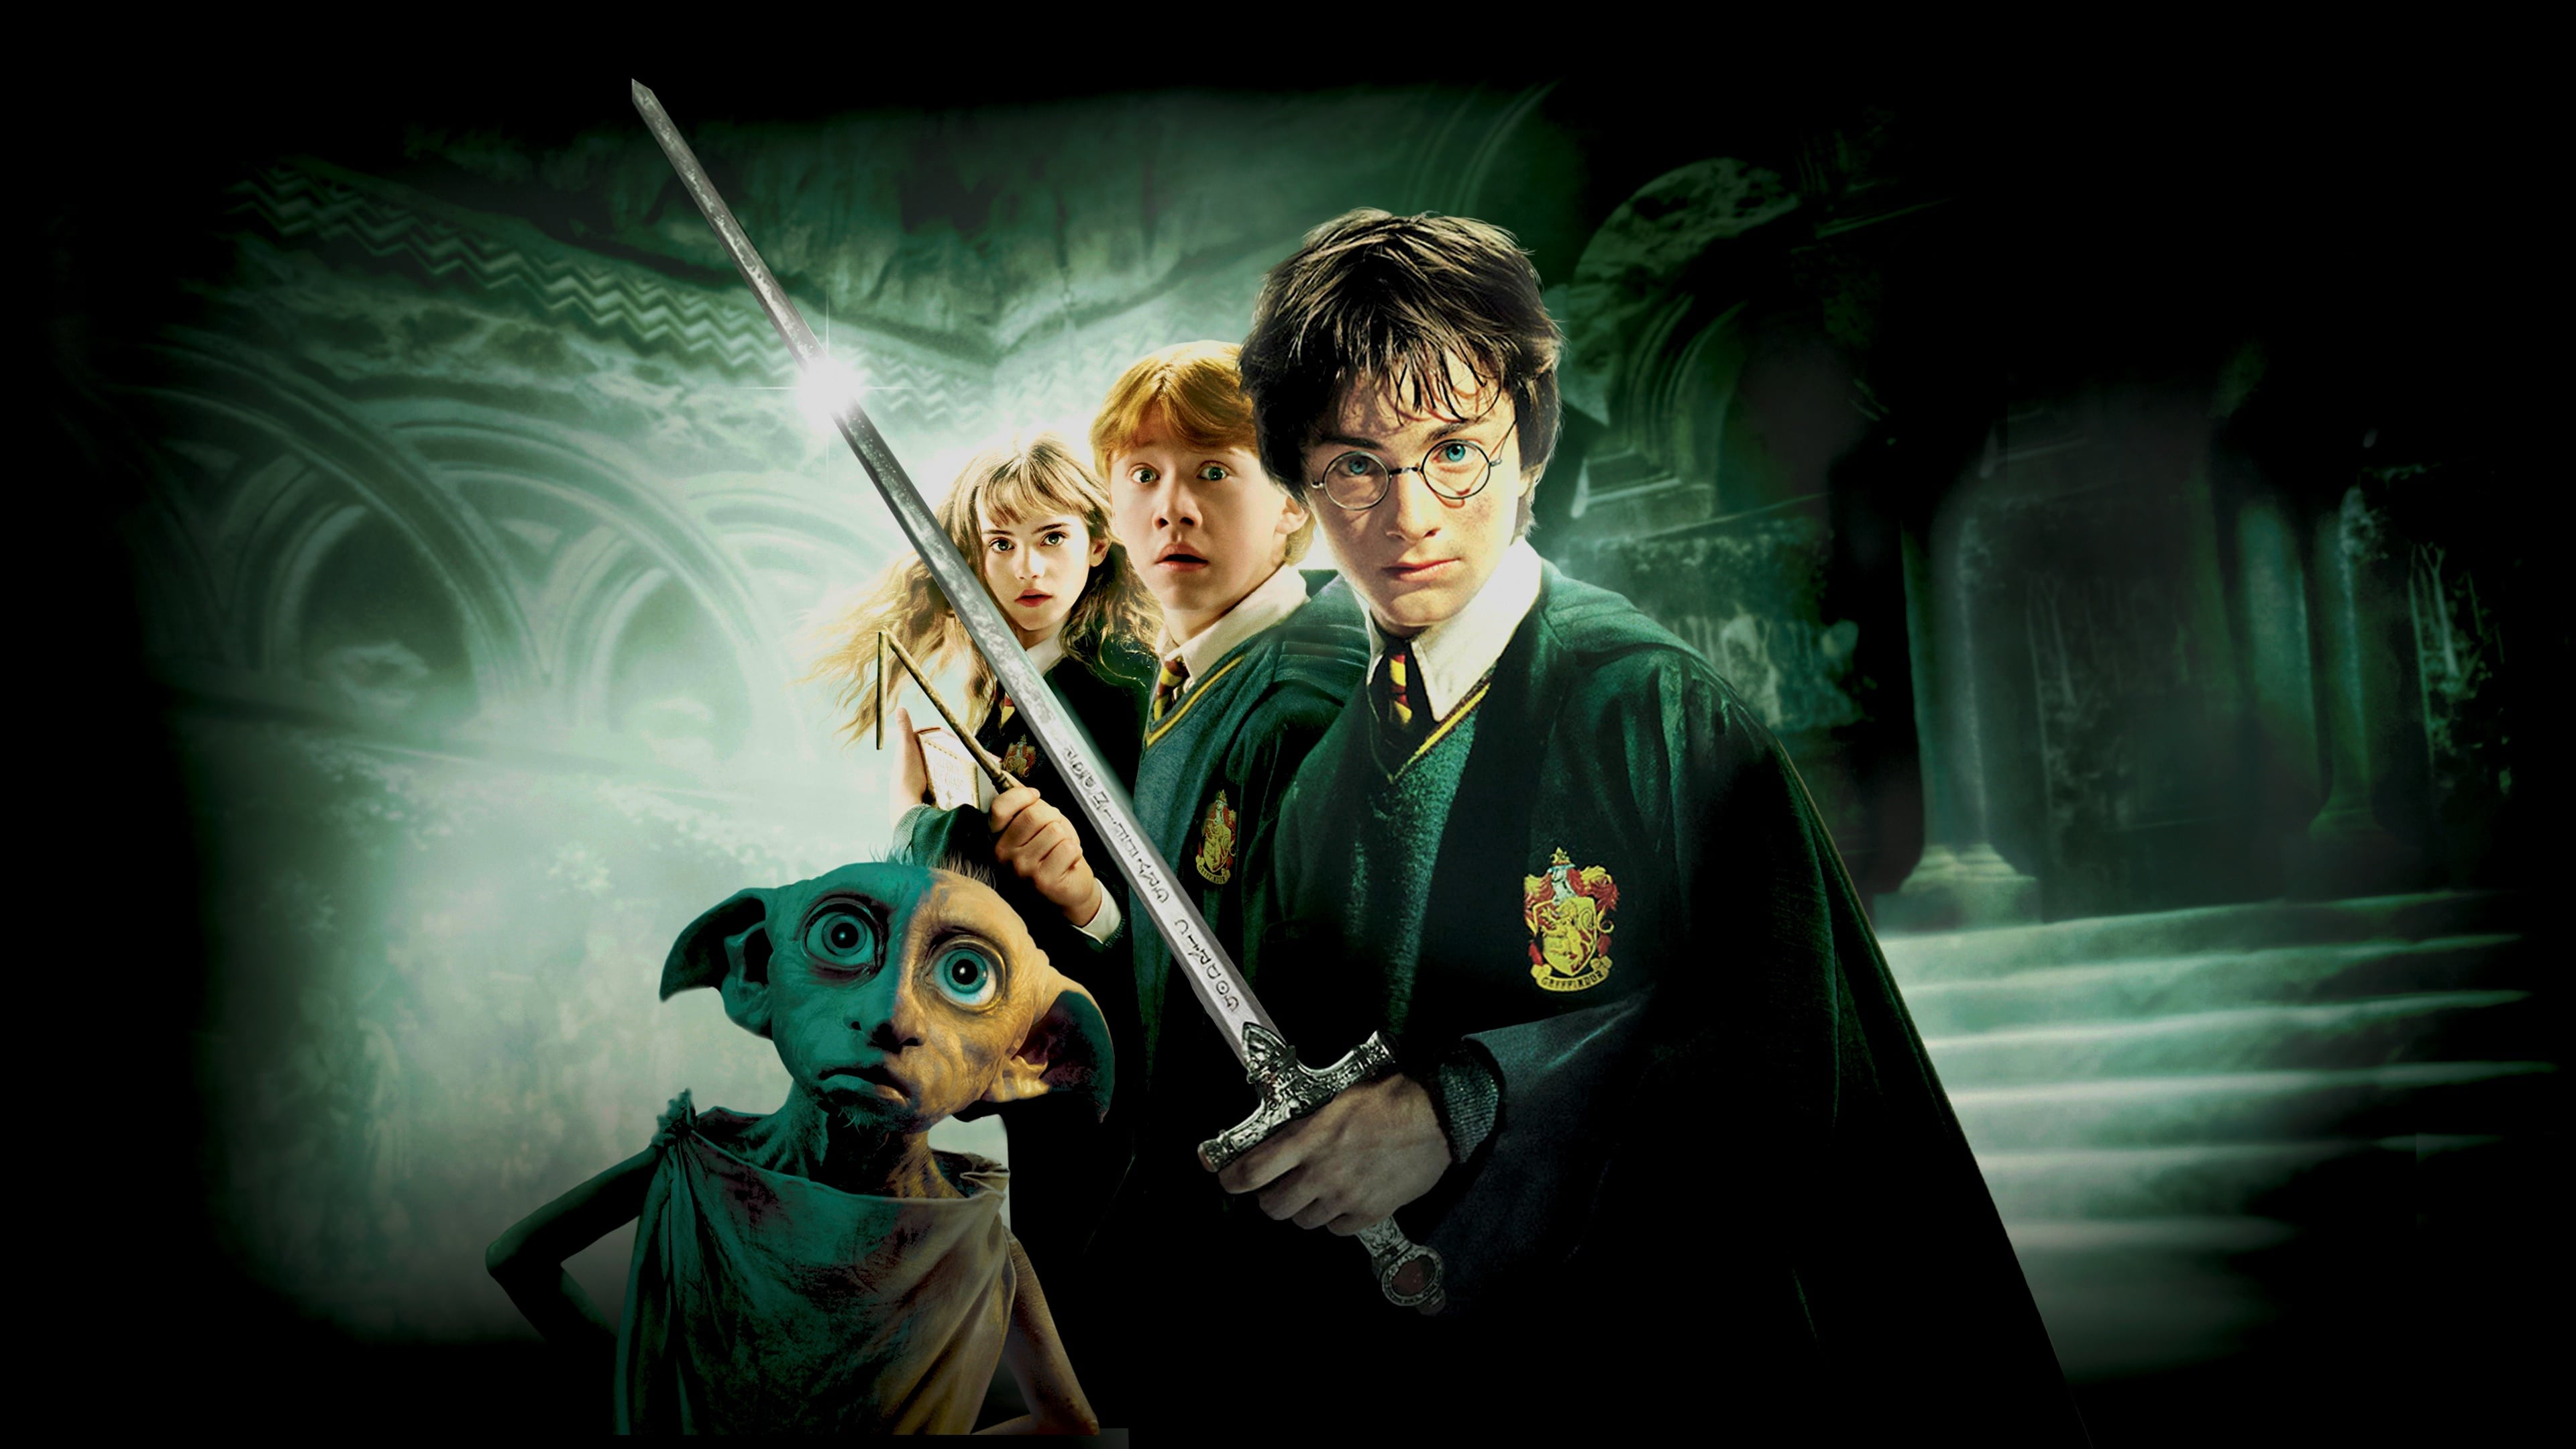 harry potter chamber of secrets 123movies